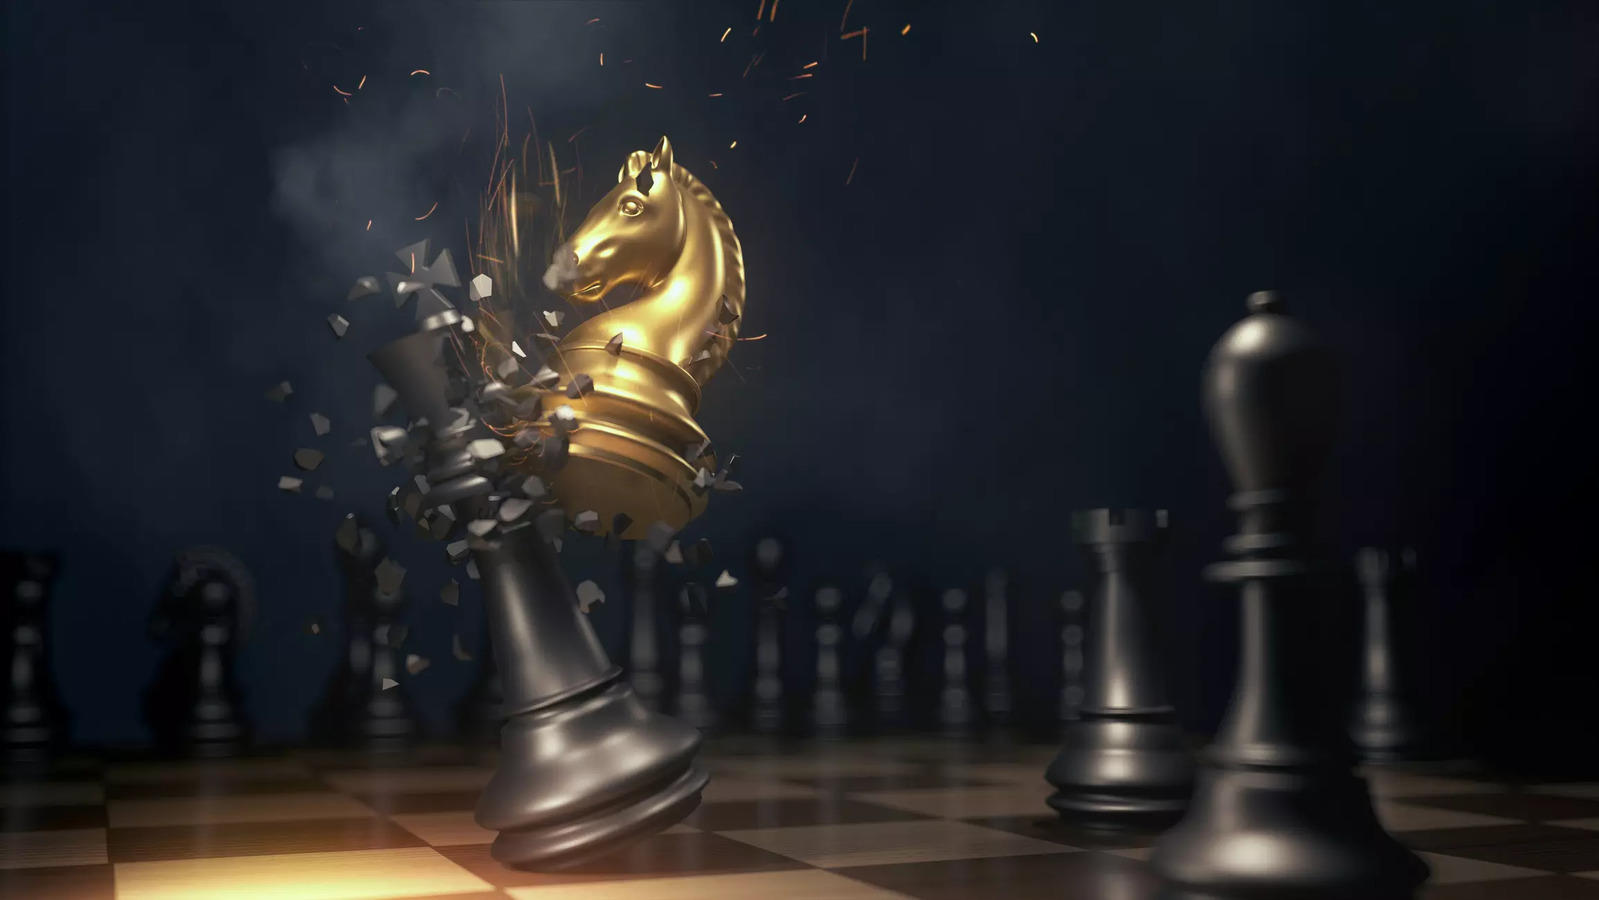 Pieces In Positions Of Power: A Chess Analogy